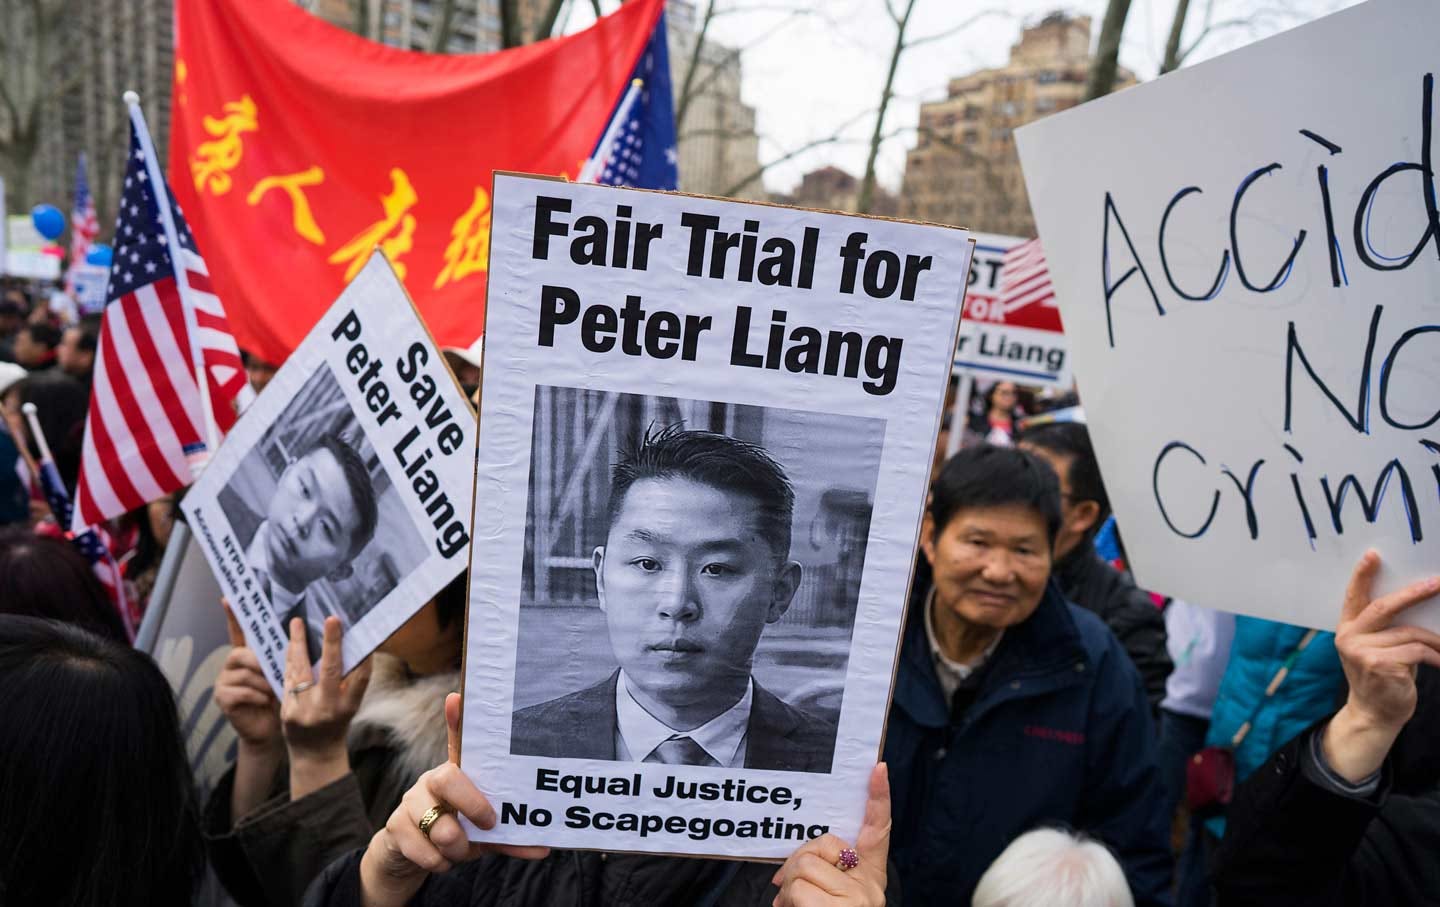 Protest in support of Peter Liang on Feb. 20 in Brooklyn, NY. Source: Craig Ruttle / Associated Press.